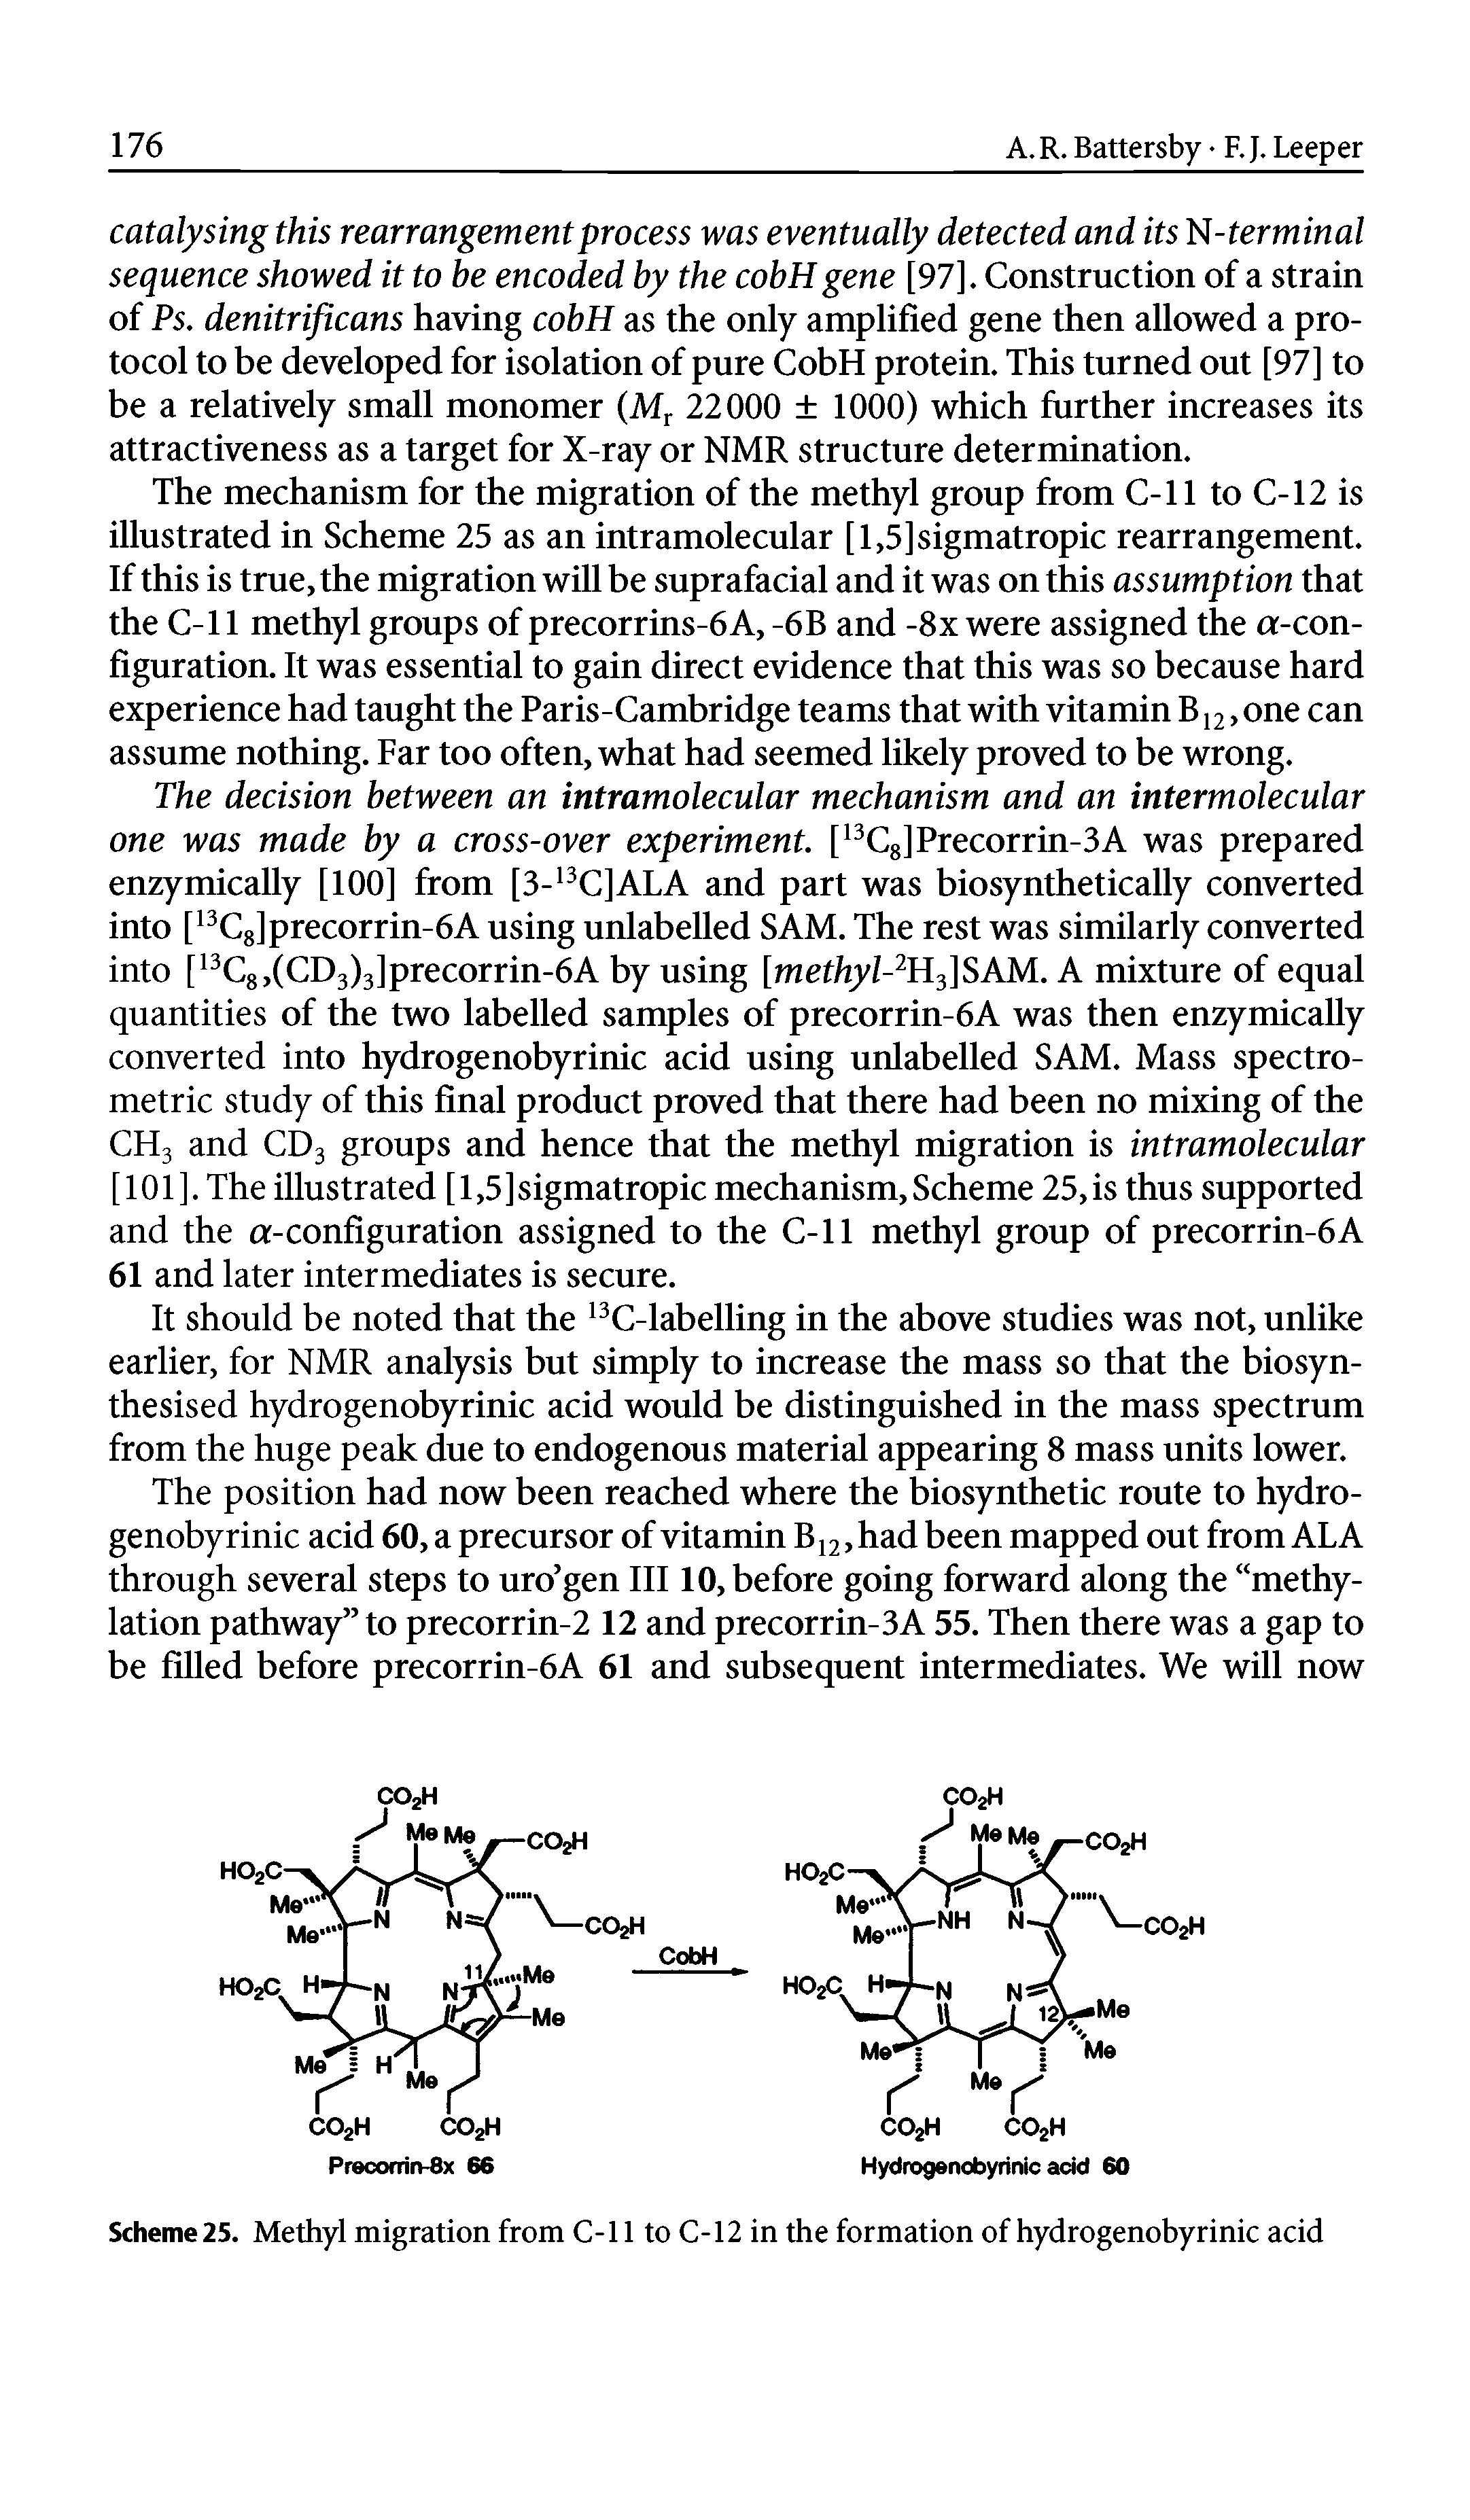 Scheme 25. Methyl migration from C-11 to C-12 in the formation of hydrogenobyrinic acid...